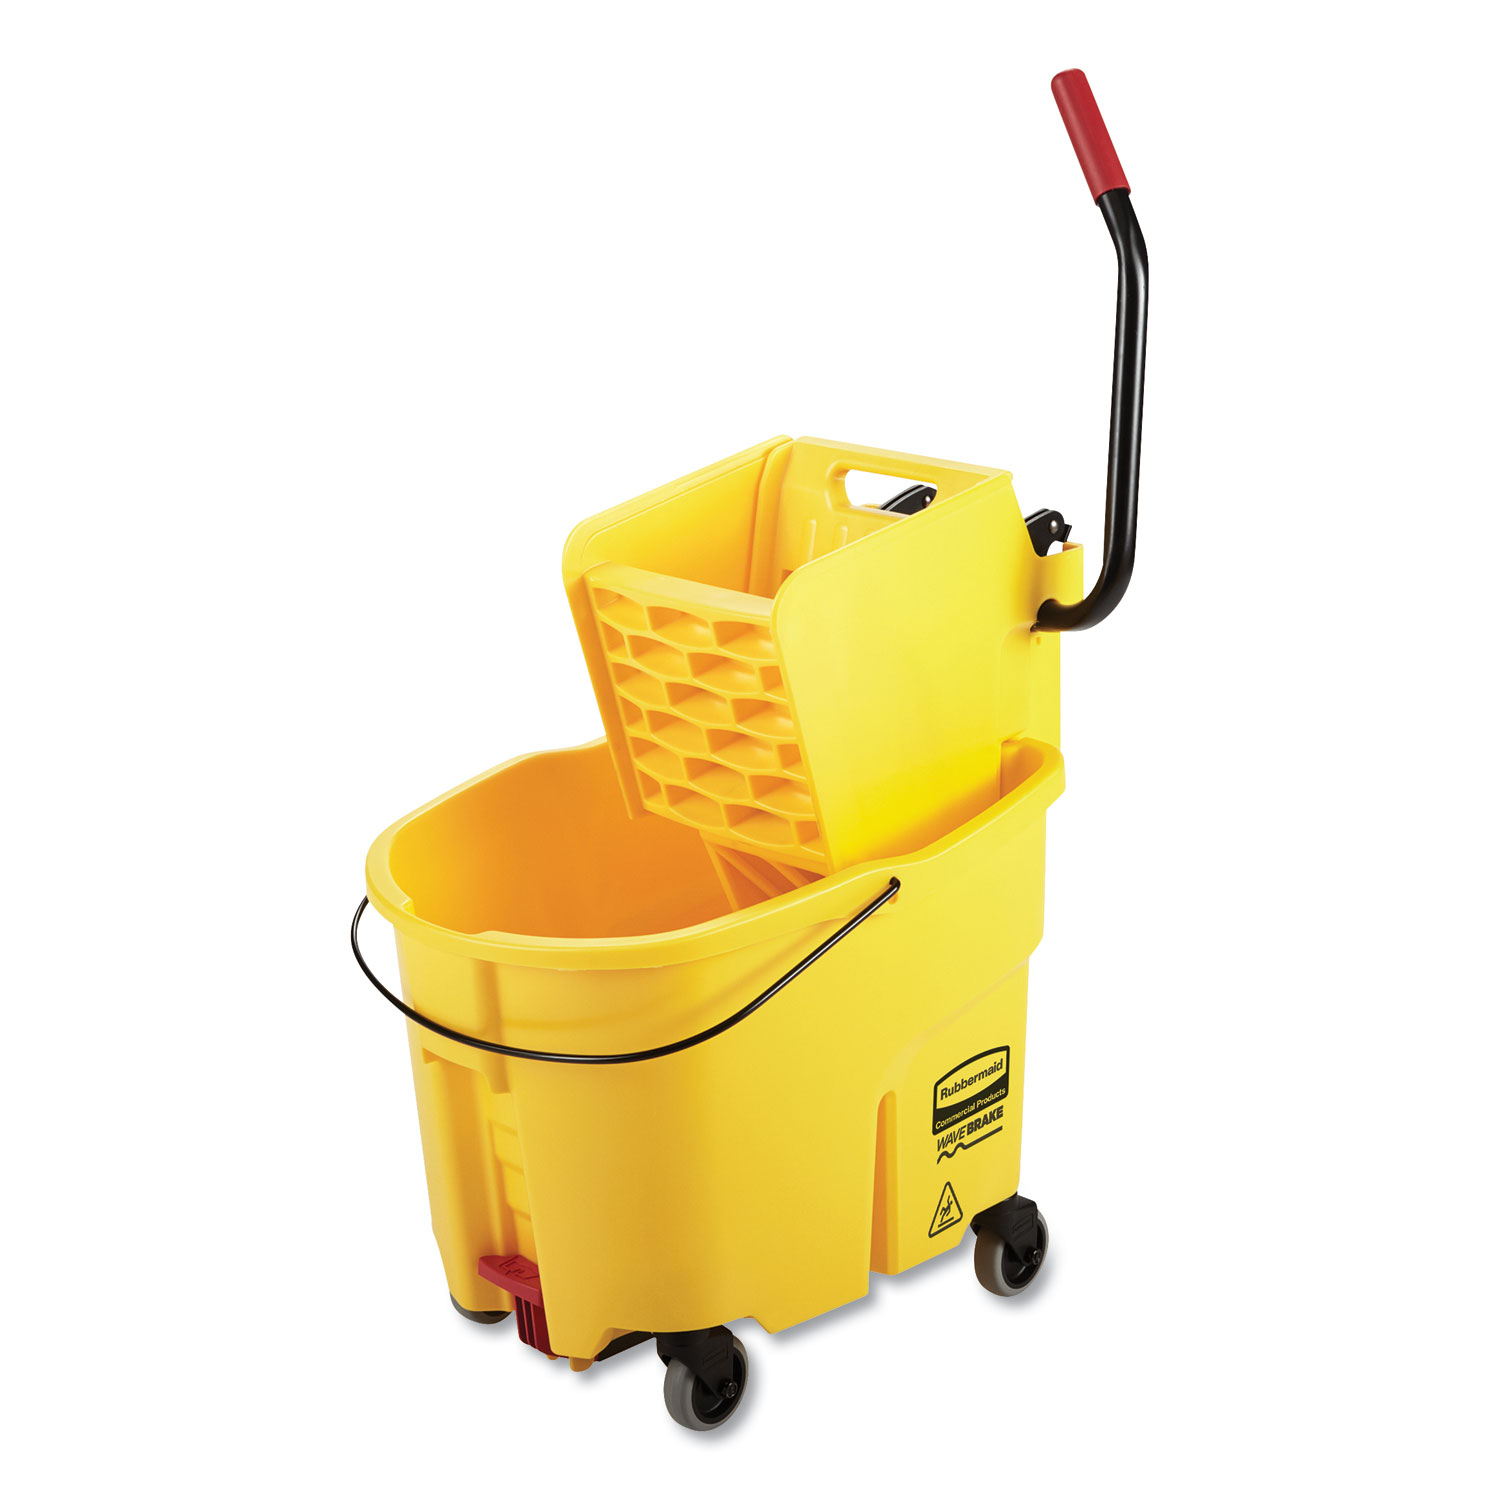  Rubbermaid Commercial 2031764 WaveBrake 2.0 Bucket/Wringer Combos, 8.75 gal, Side Press with Drain, Yellow (RCP2031764) 